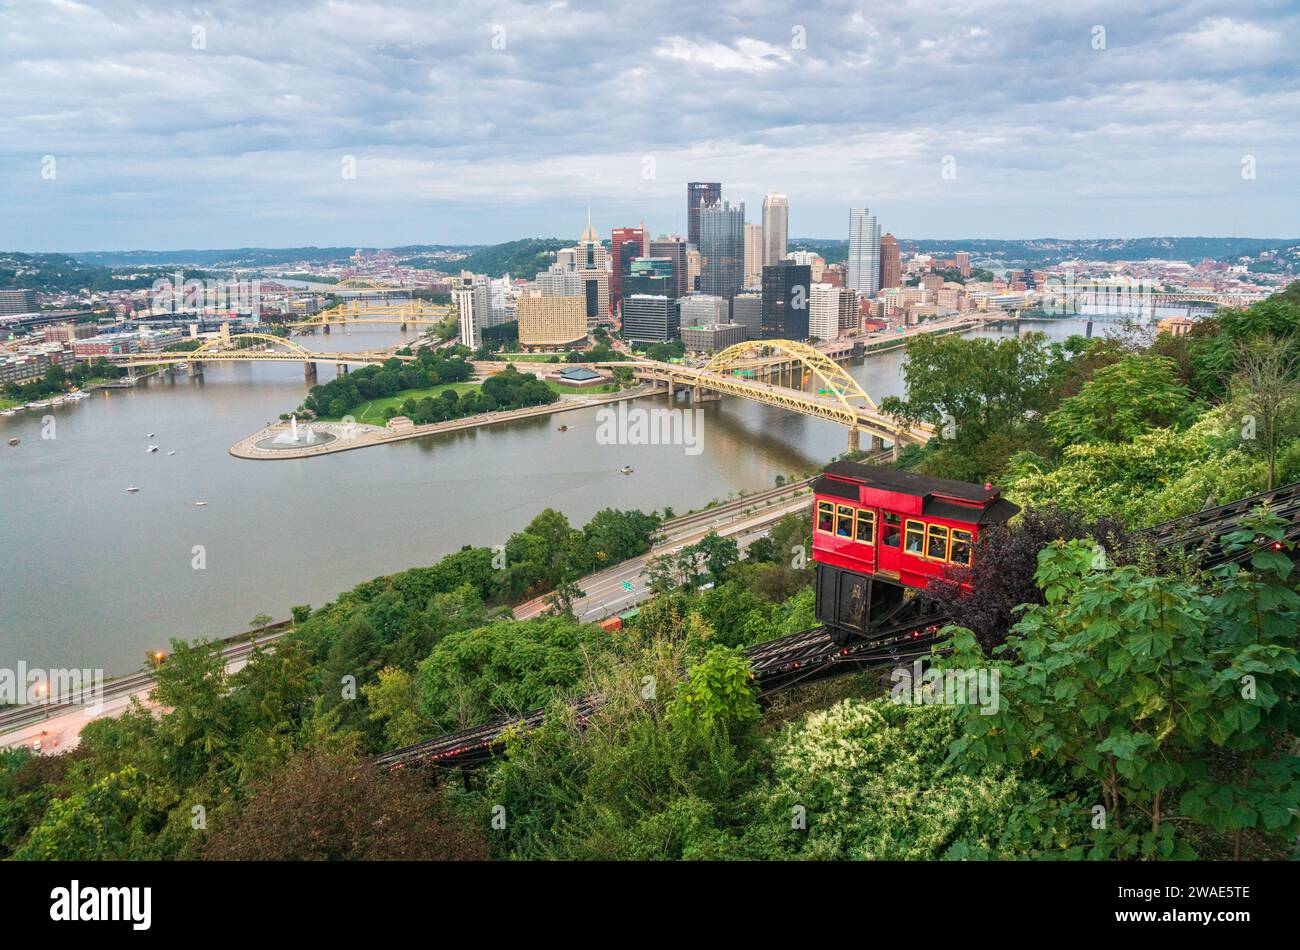 The Duquesne Incline in September, Pittsburgh, PA, USA Stock Photo